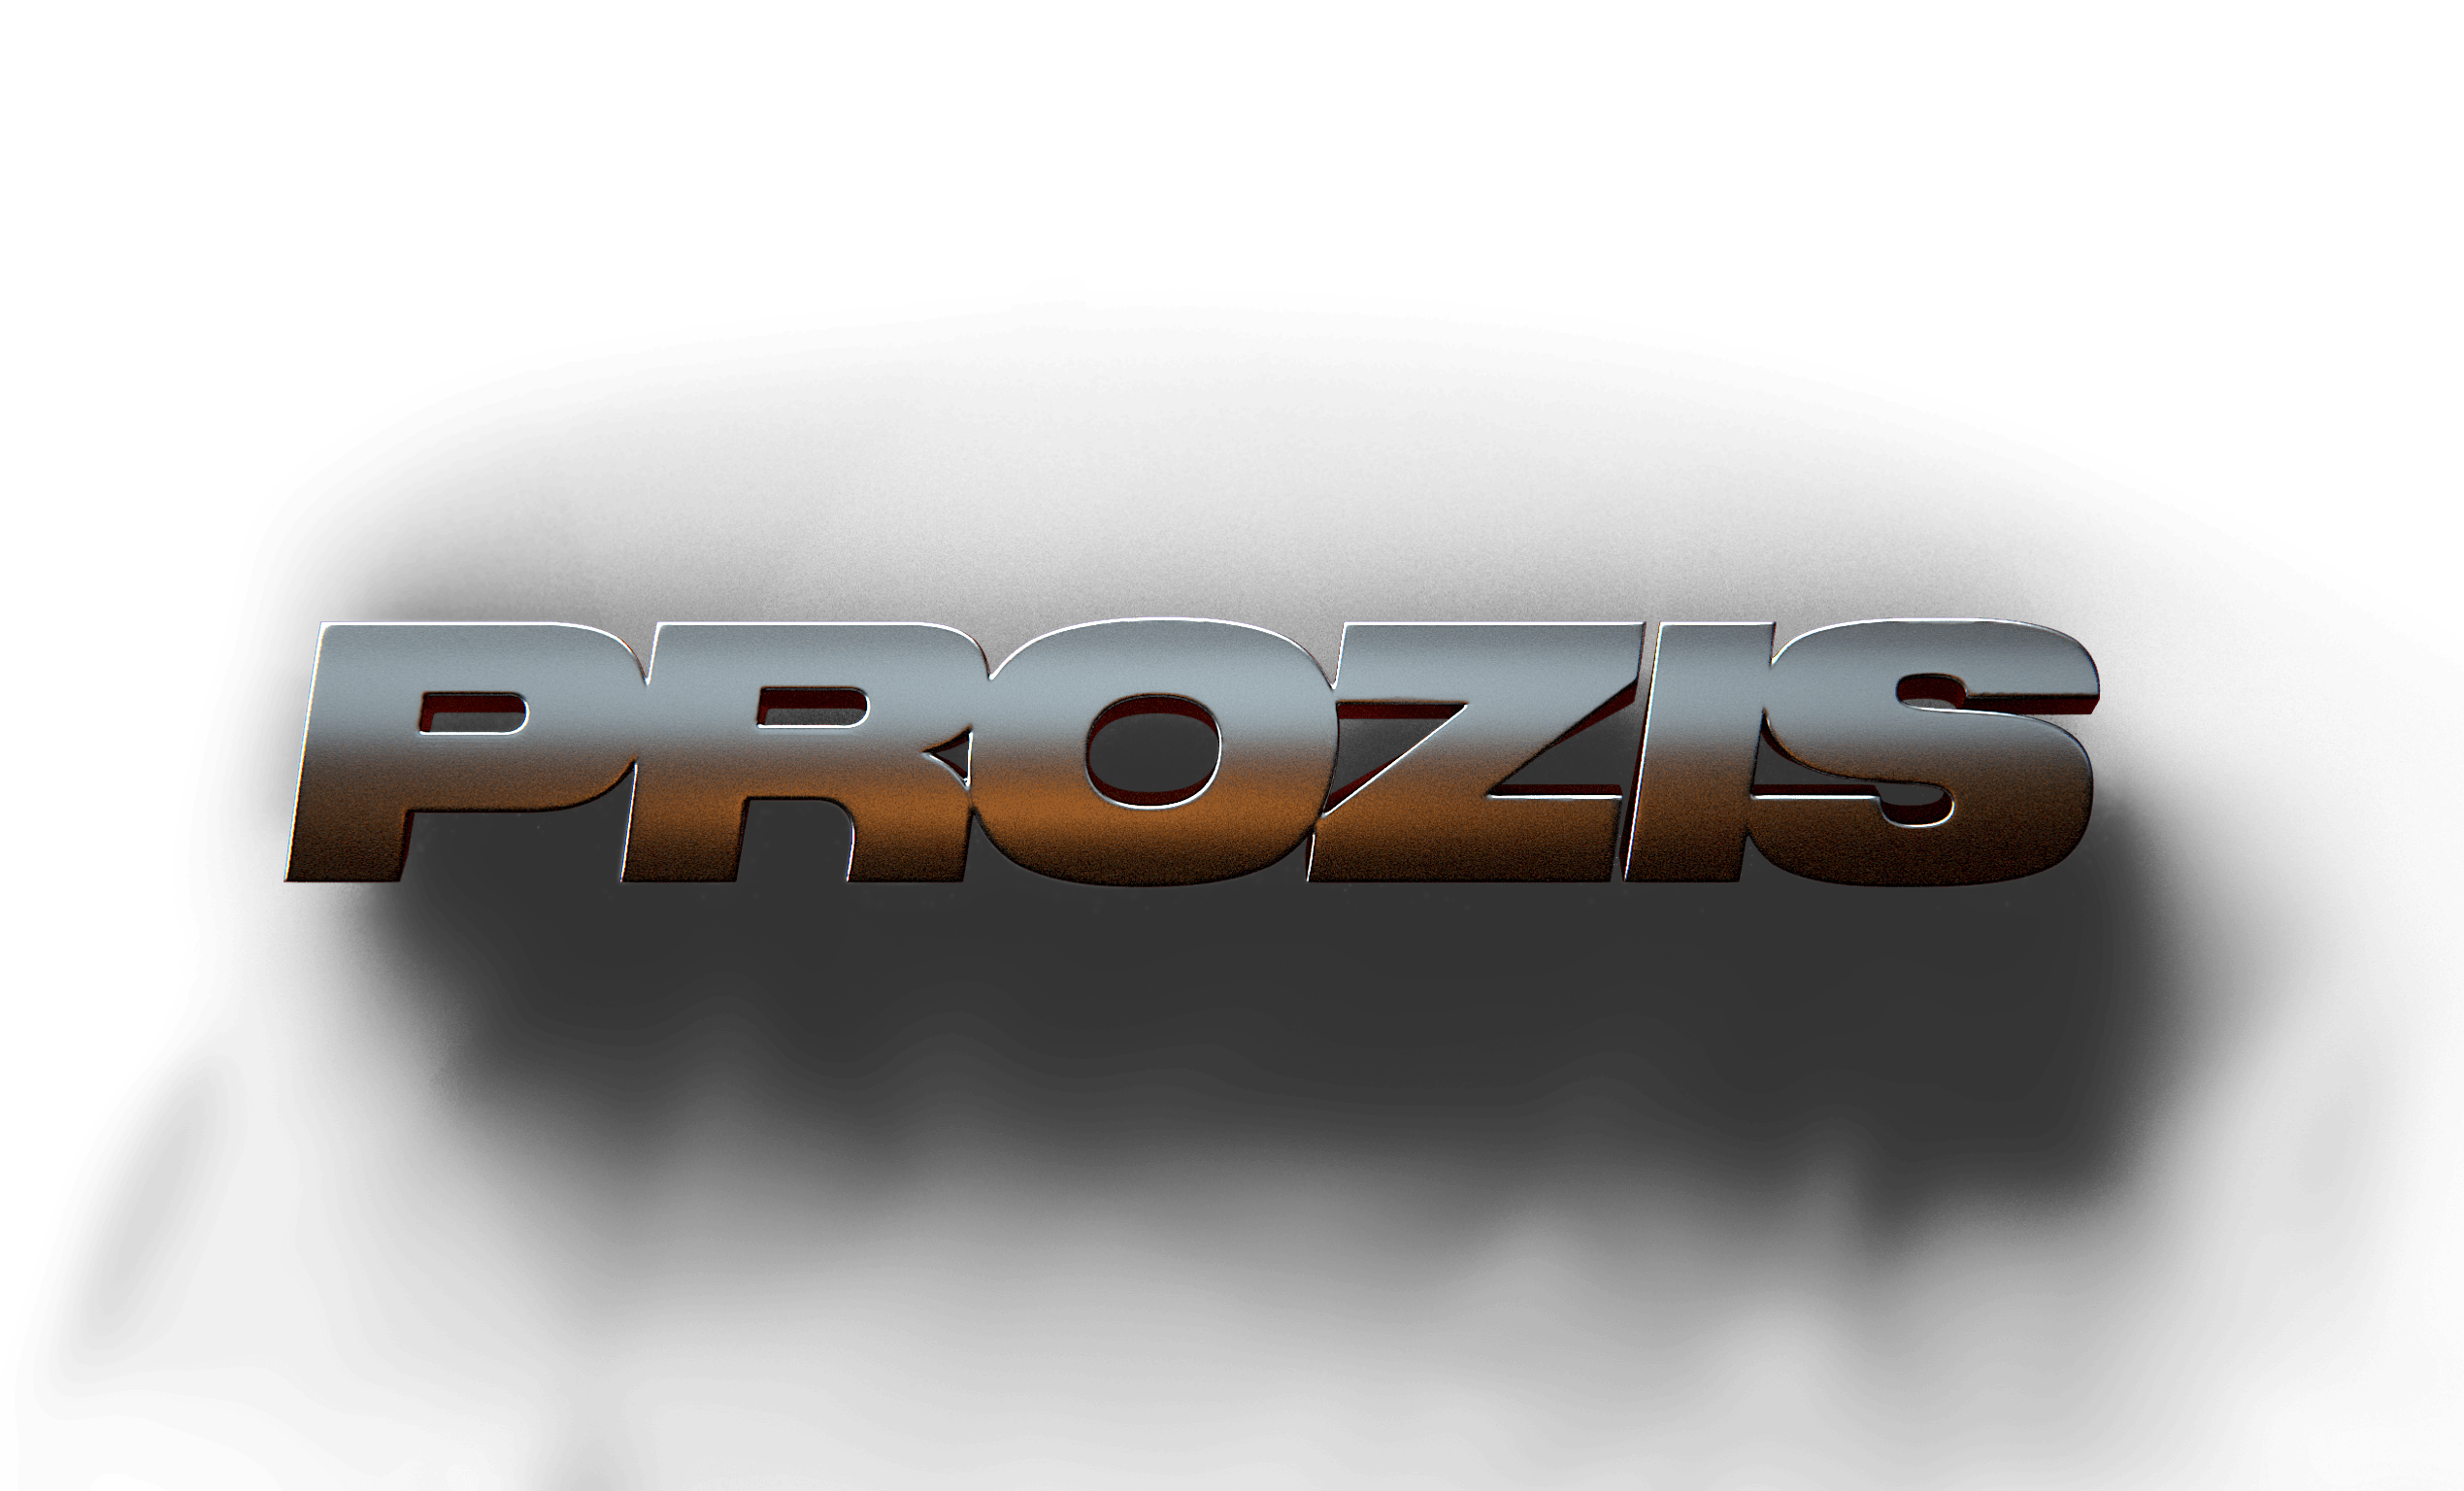 http://www.prozis.group/assets/PROZIS_2019.png